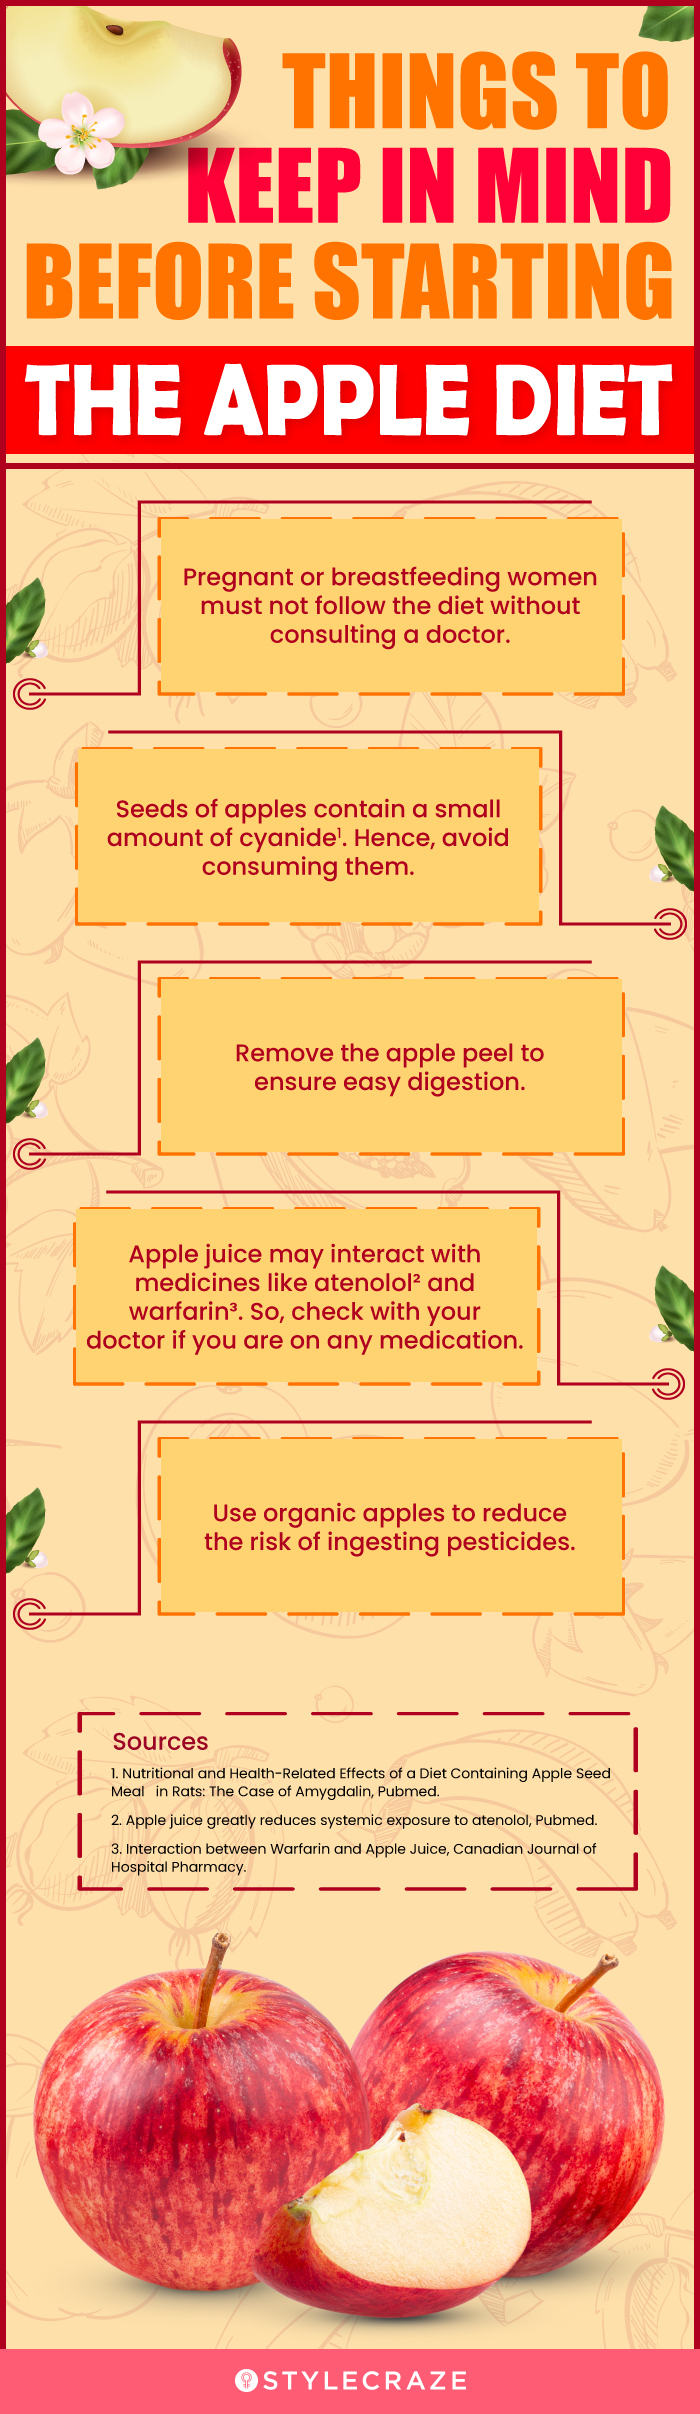 Apples 101: Benefits, Weight Loss Potential, Side Effects, and More